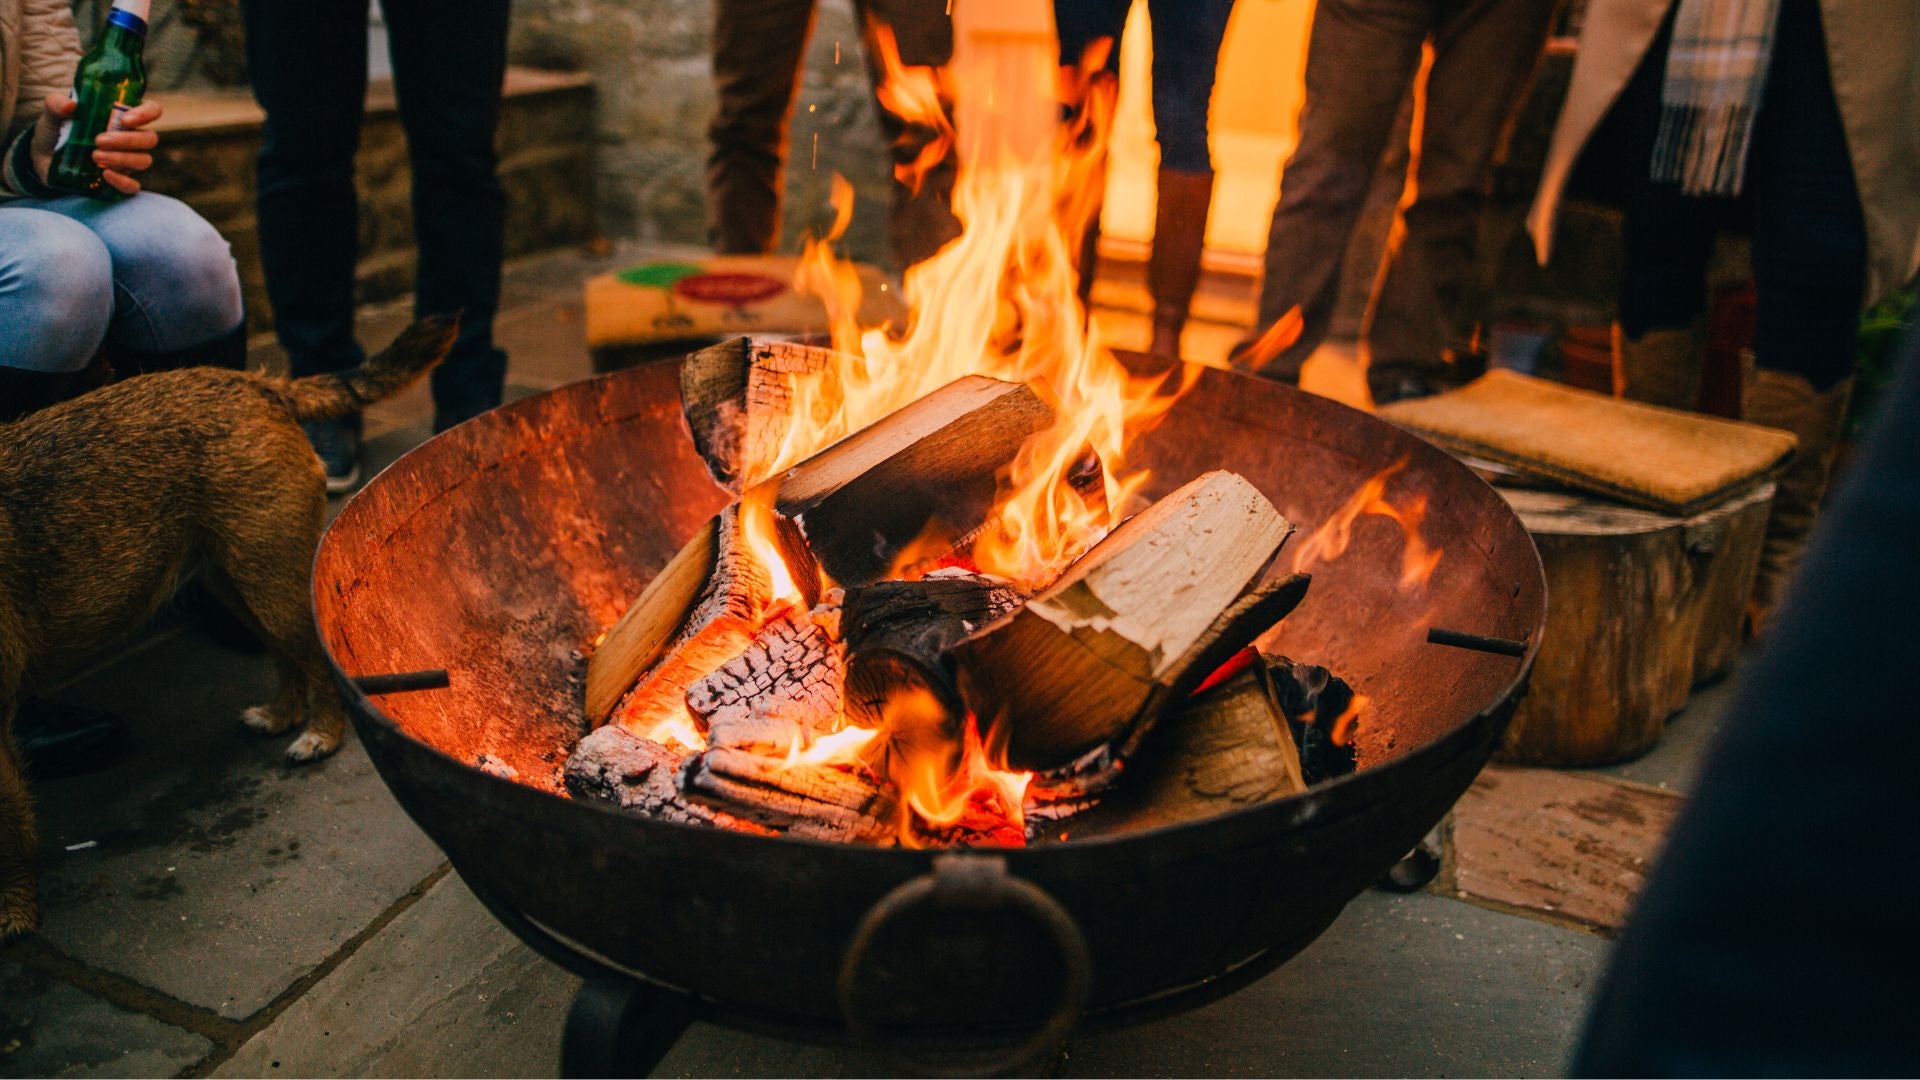 How Do You Make An Outdoor Fire Pit Safe?